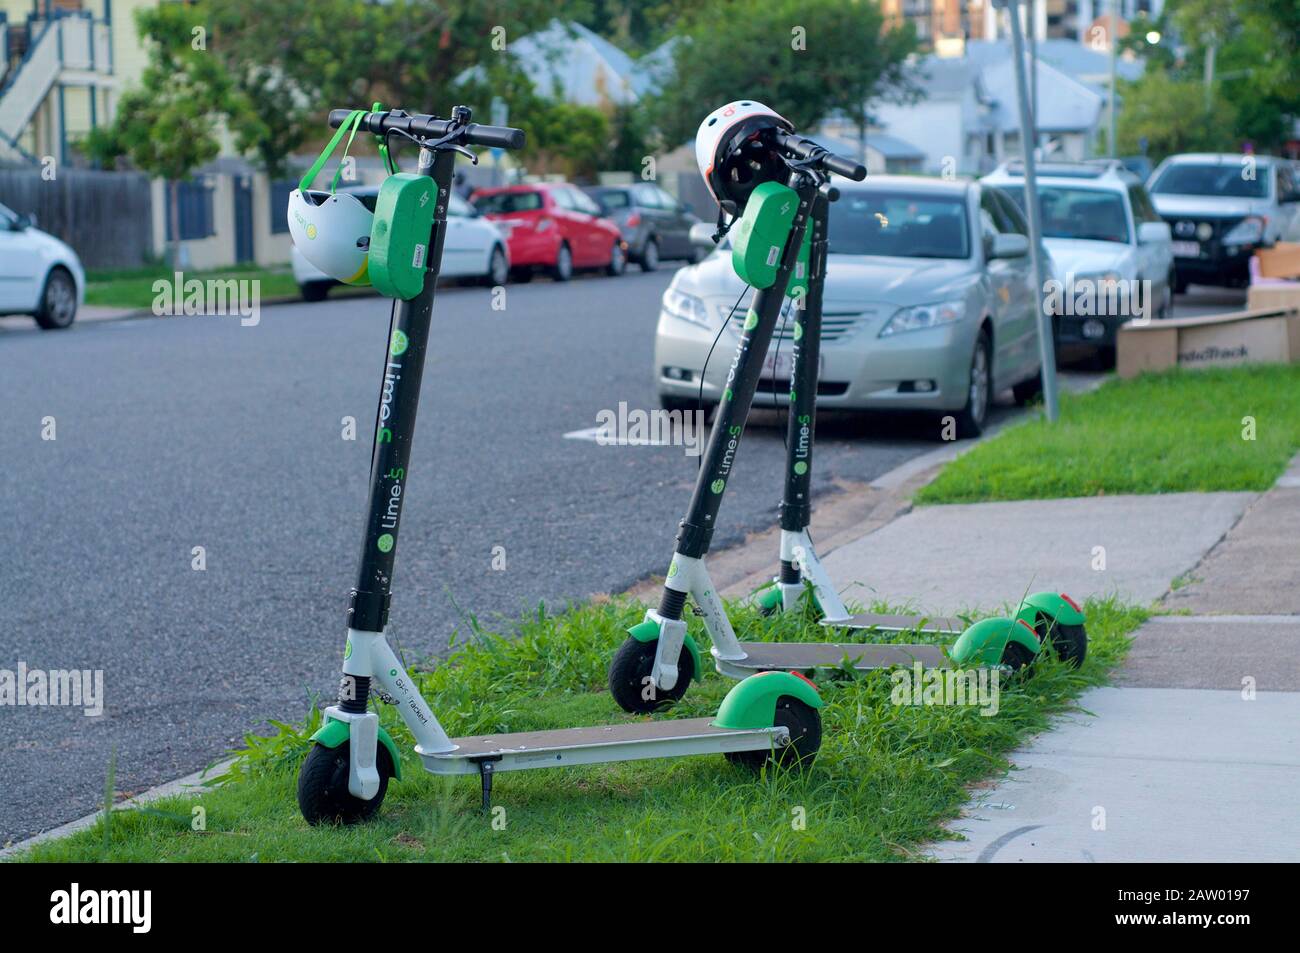 Brisbane, Queensland, Australia - 28th January 2020 : View of some Lime Electric Scooters parked on the sidewalk in Brisbane. This E-scooters used for Stock Photo